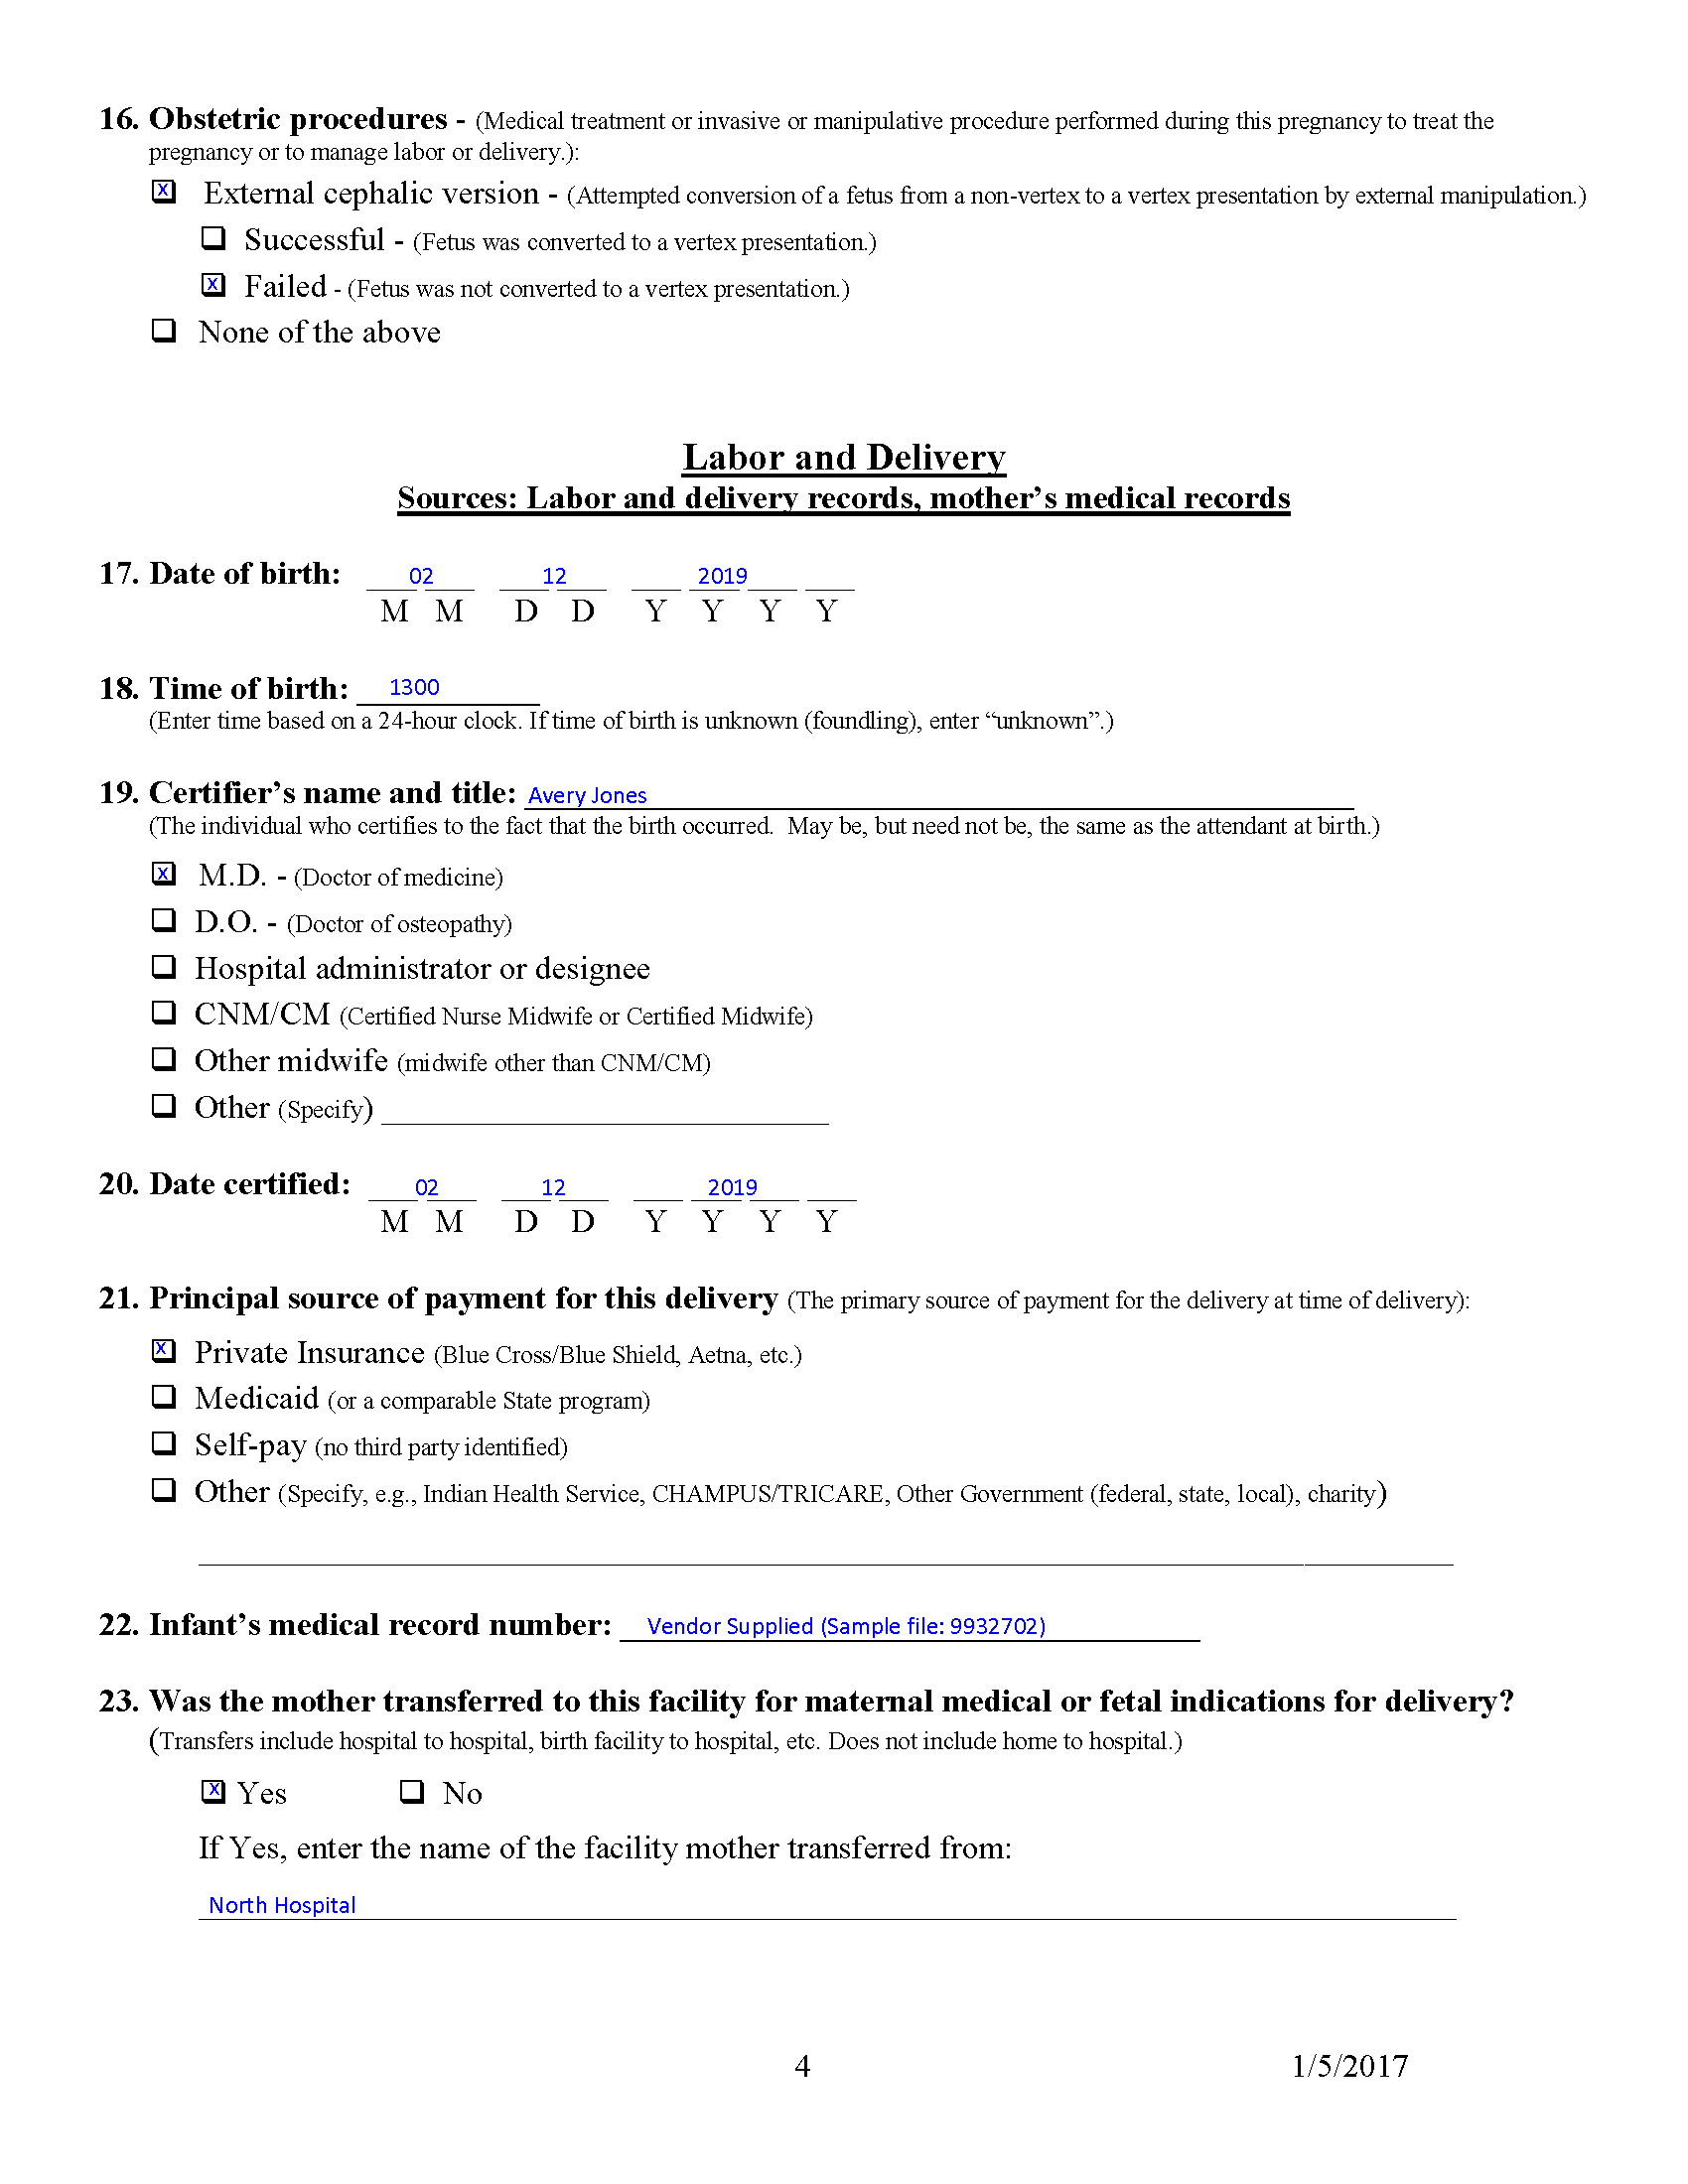 Example Facility Worksheet for Live Birth Certificate for Baby G Quinn - p4